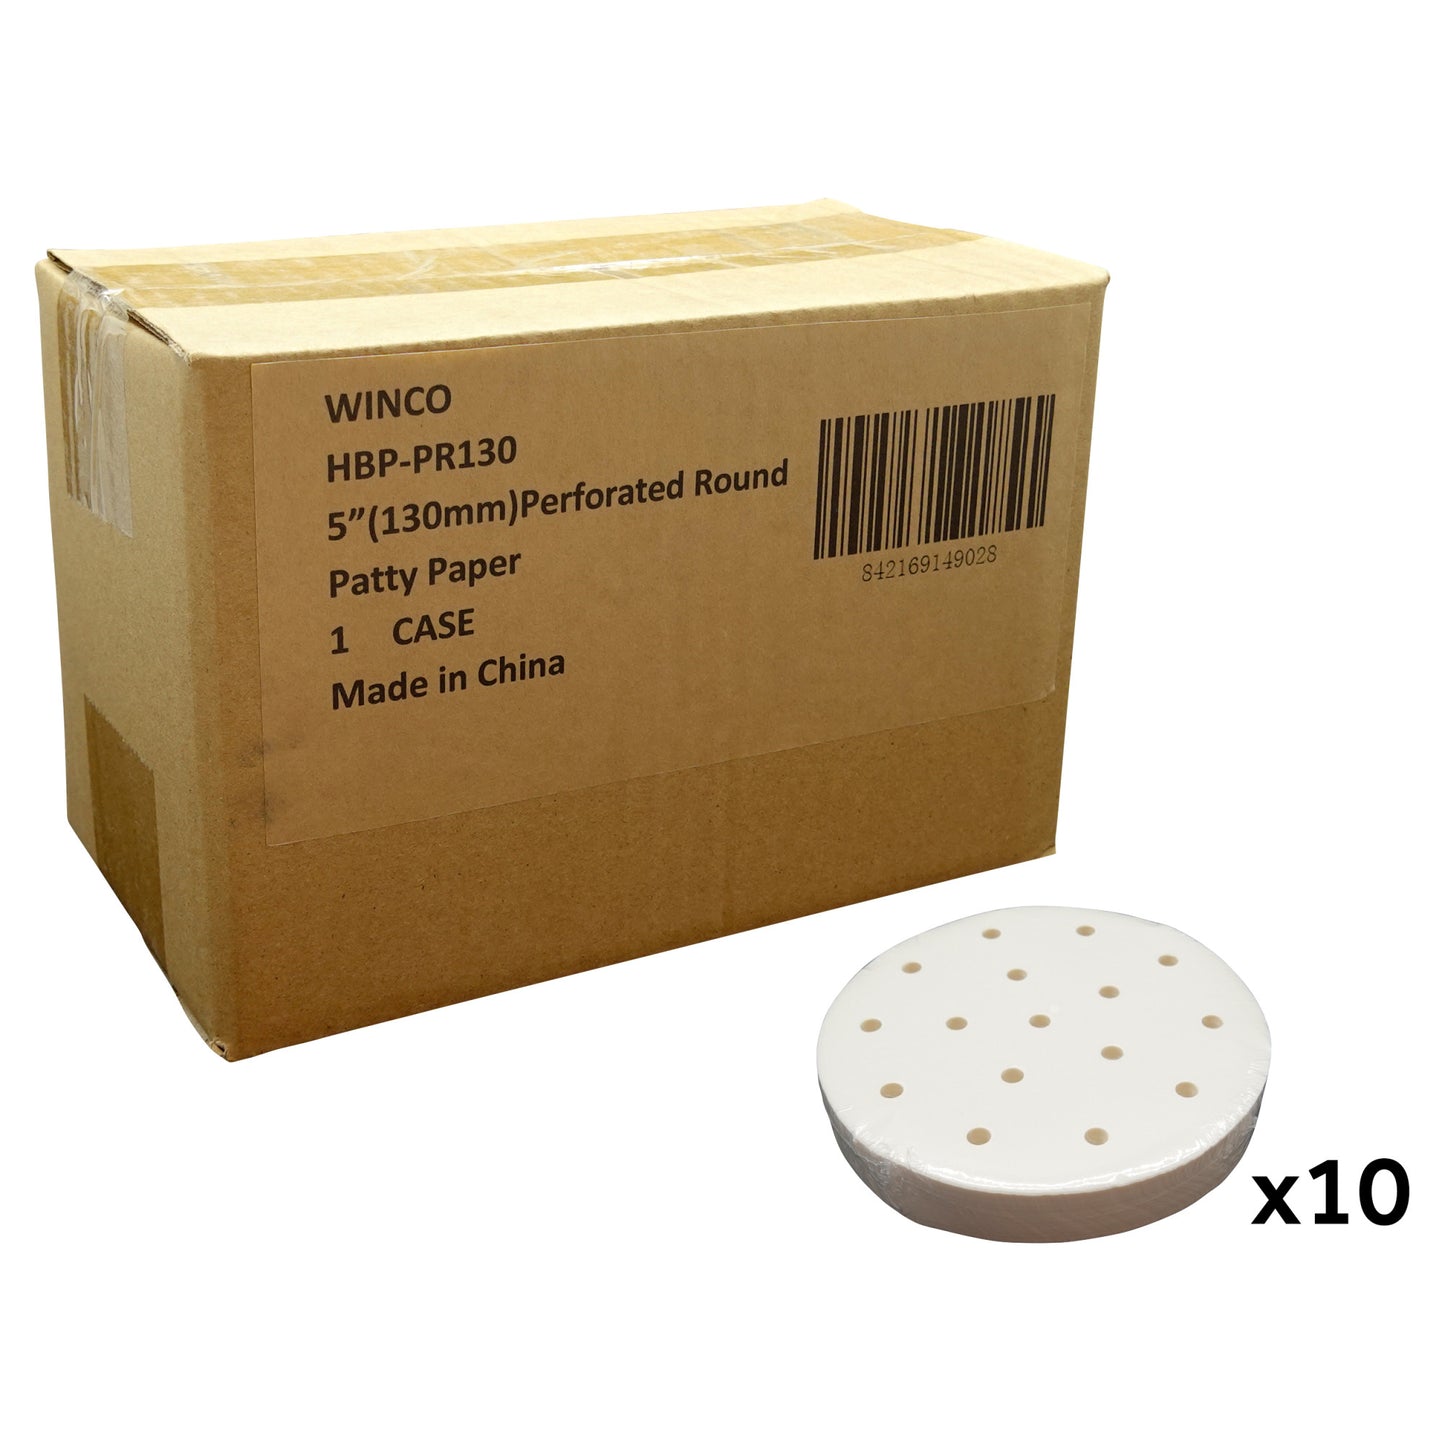 HBP-PR130 - 5" (130mm) Perforated Round Patty Paper, CS/5000 papers